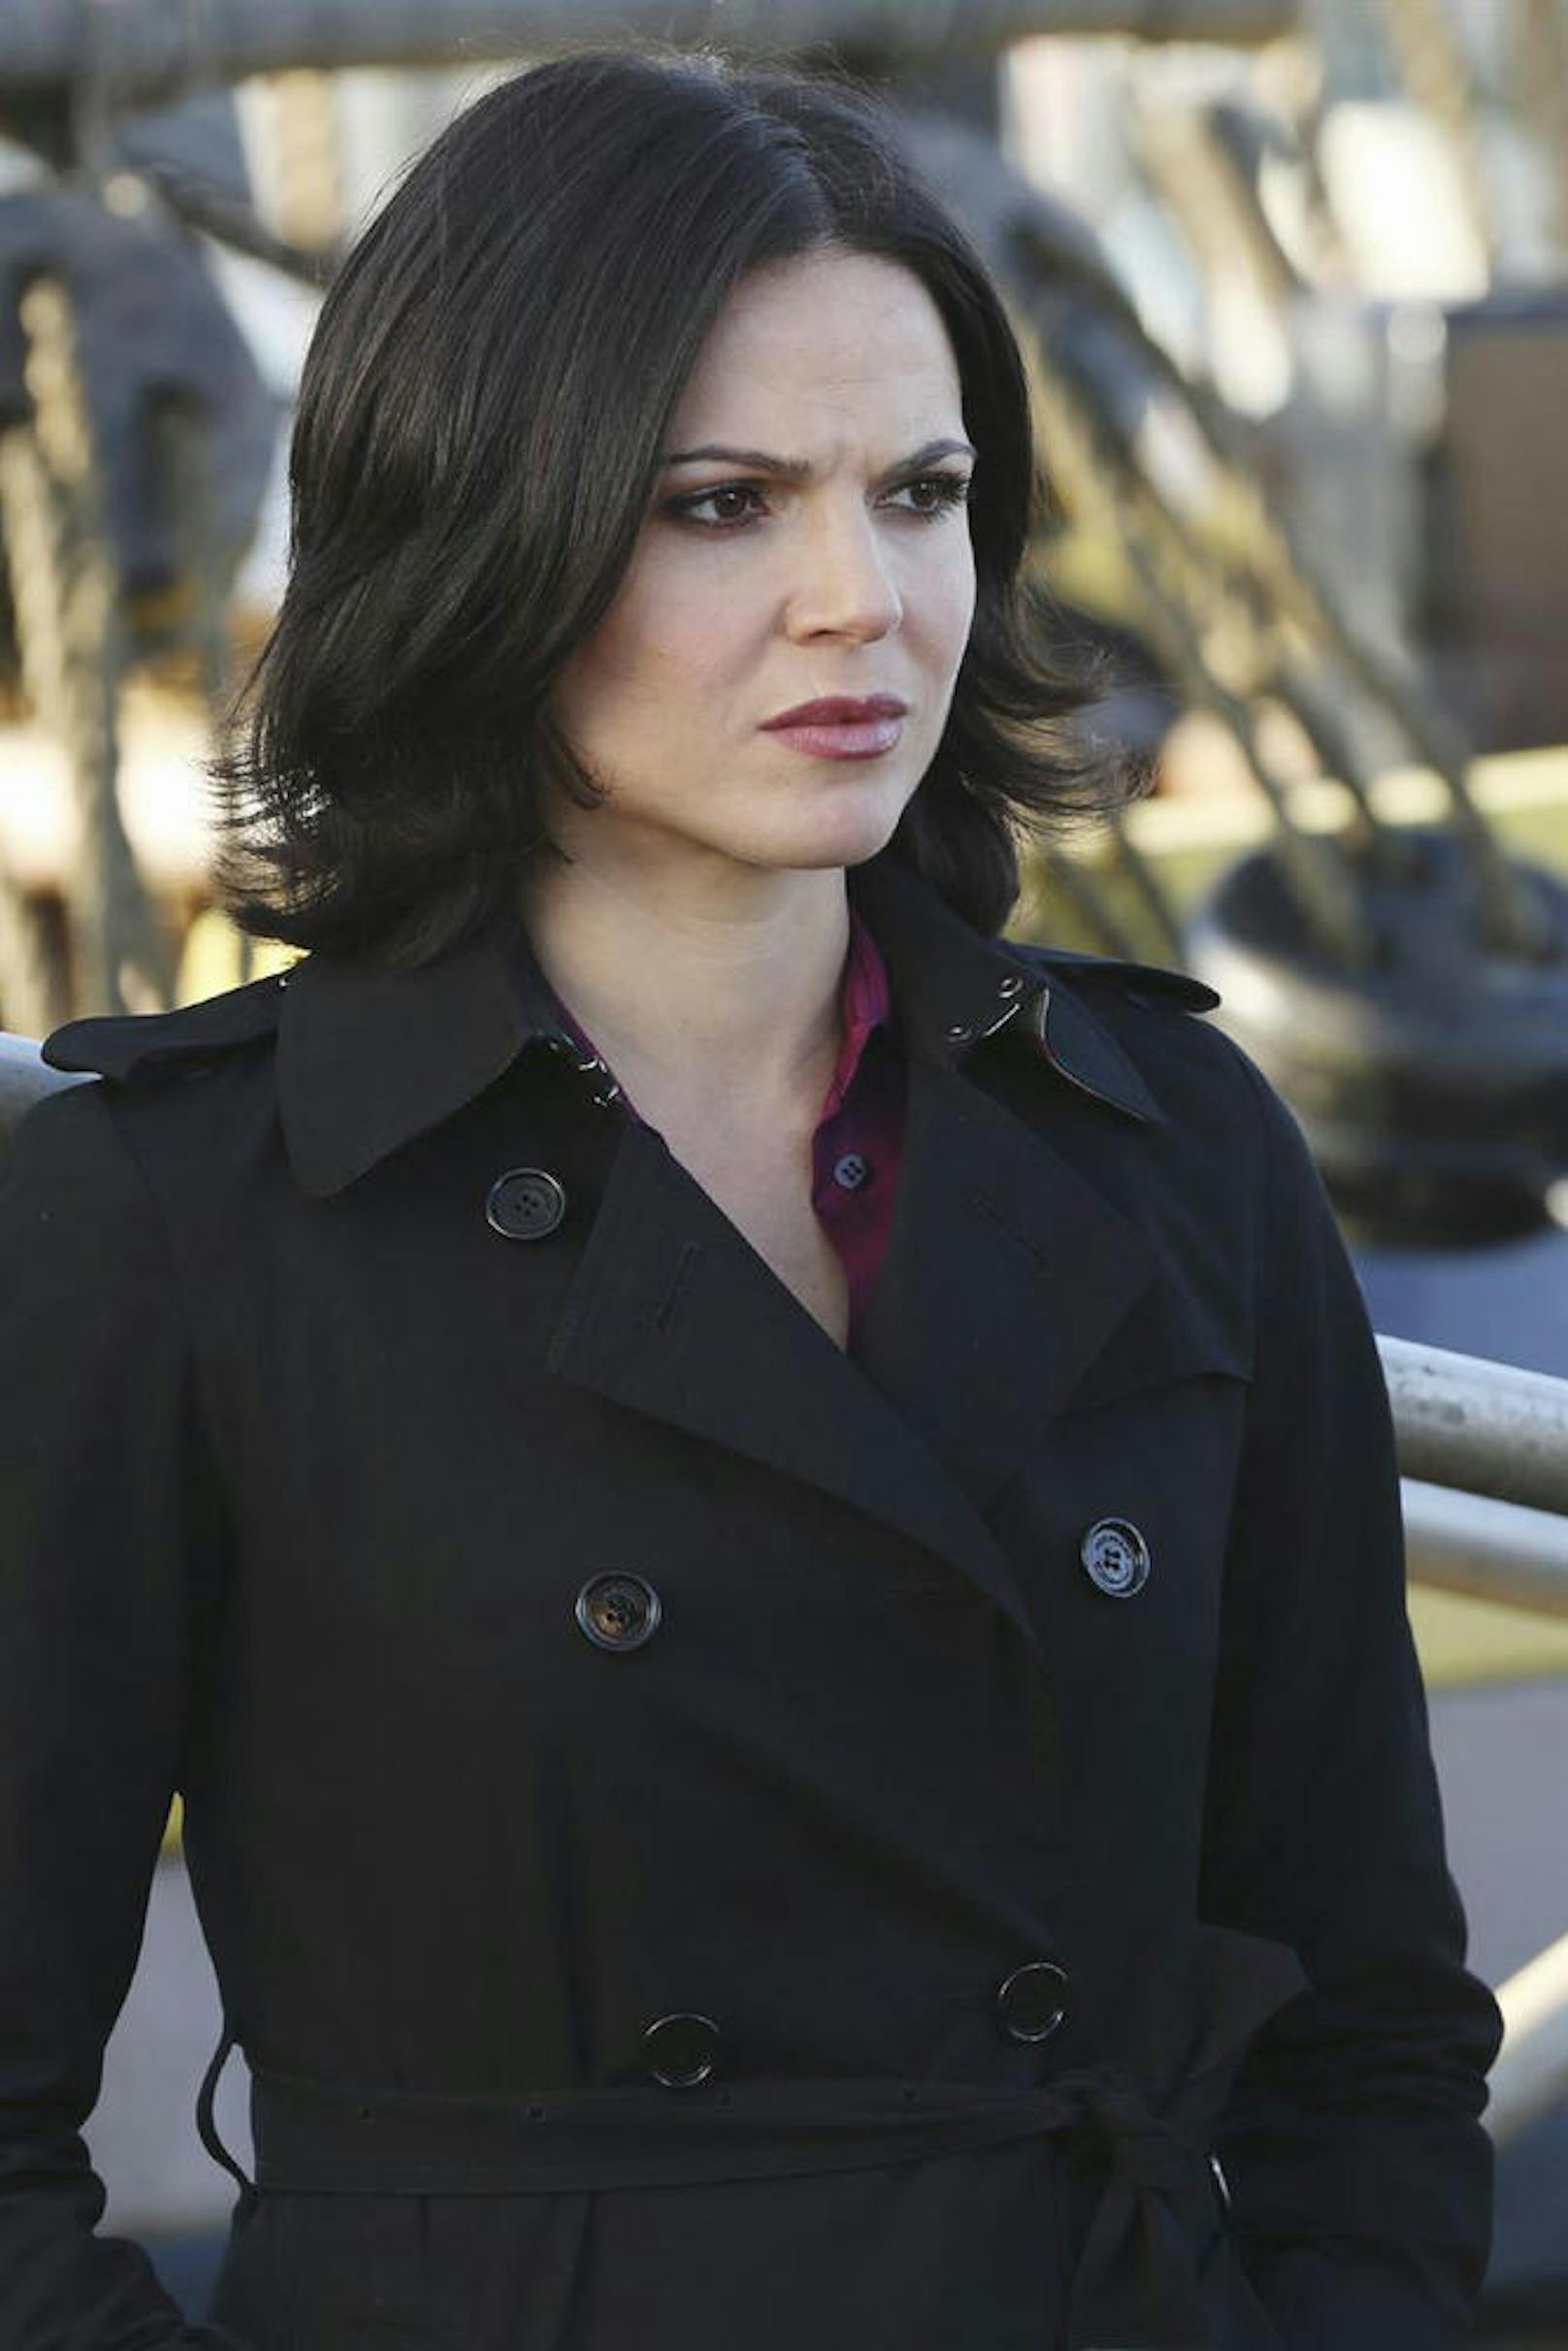 Lana Parrilla in "Once Upon a Time - Es war einmal..."